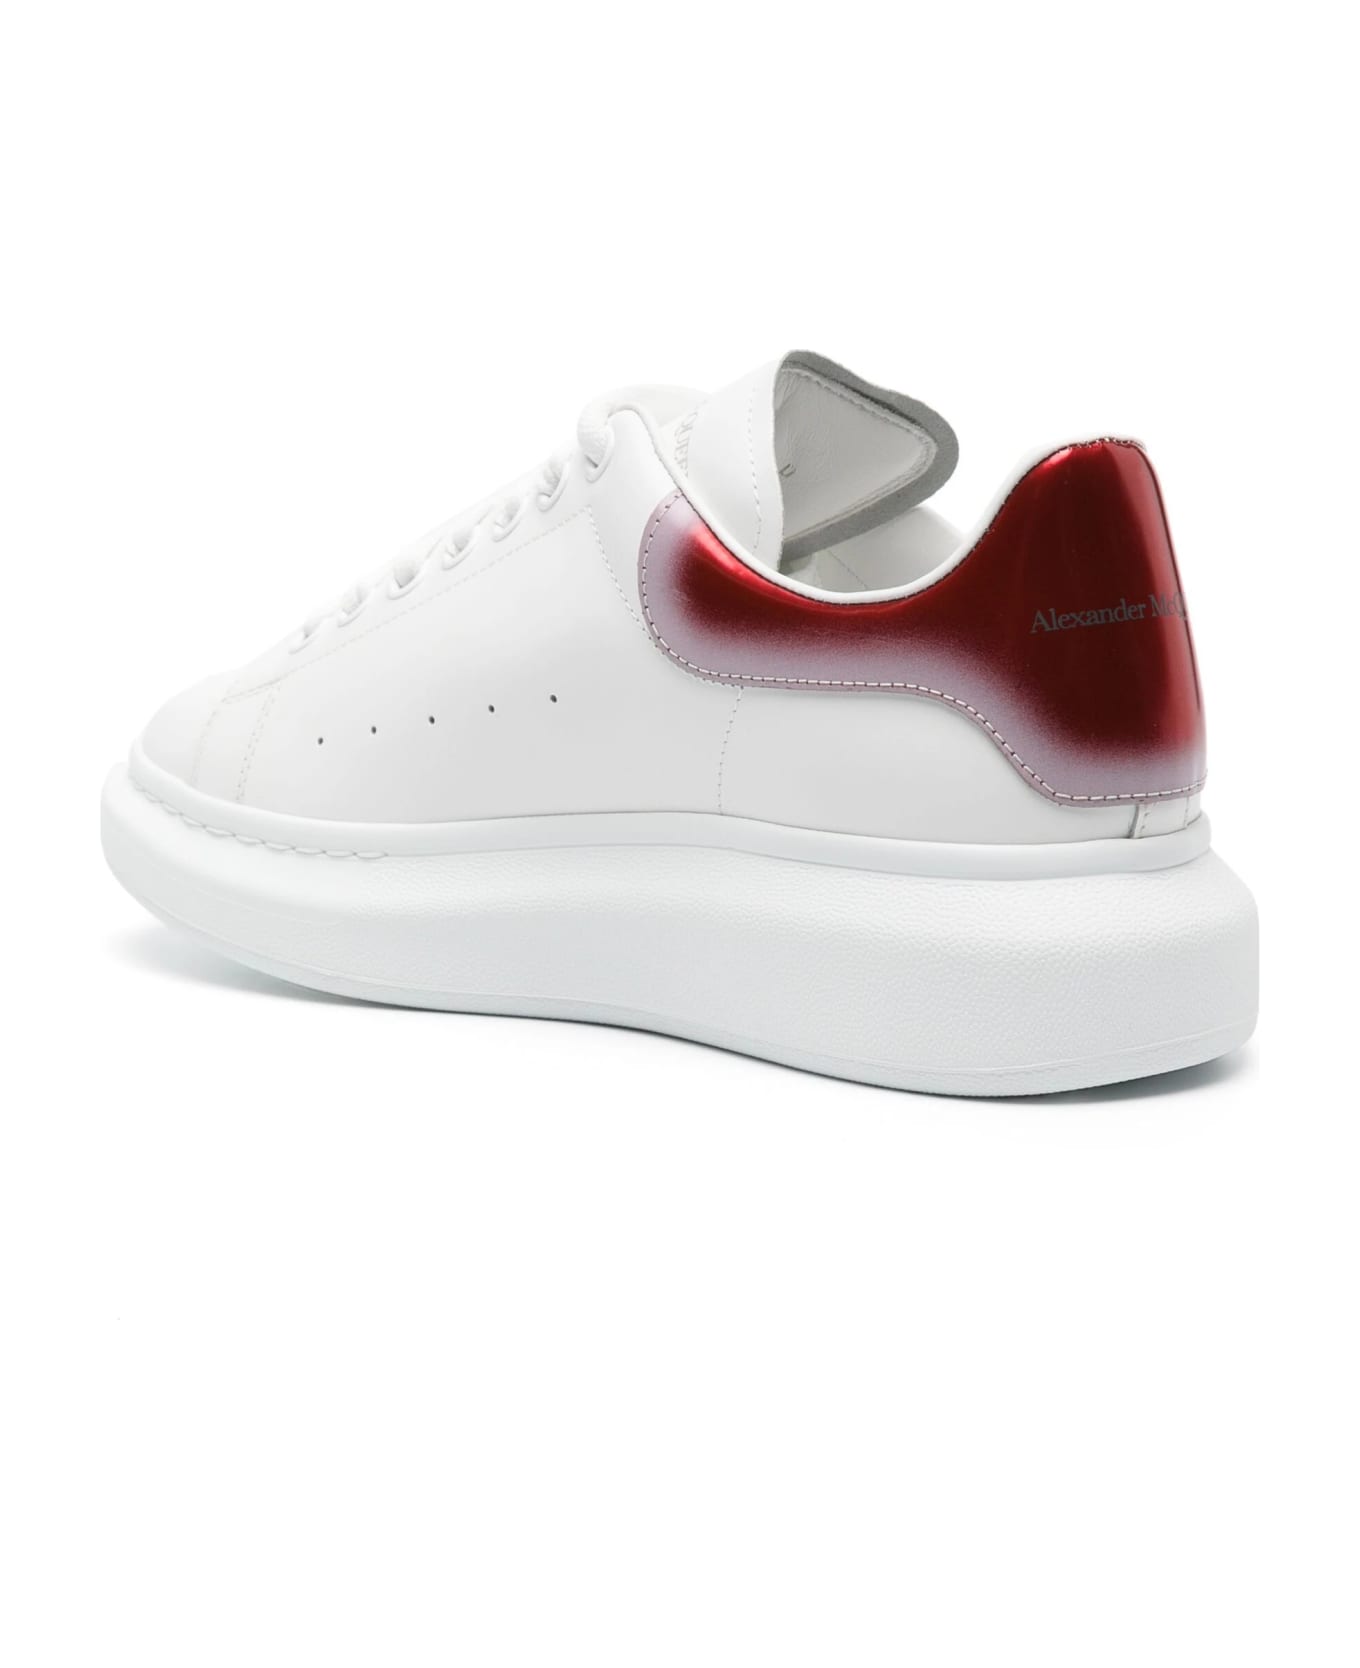 Alexander McQueen Oversized Sneakers In White And Red - White